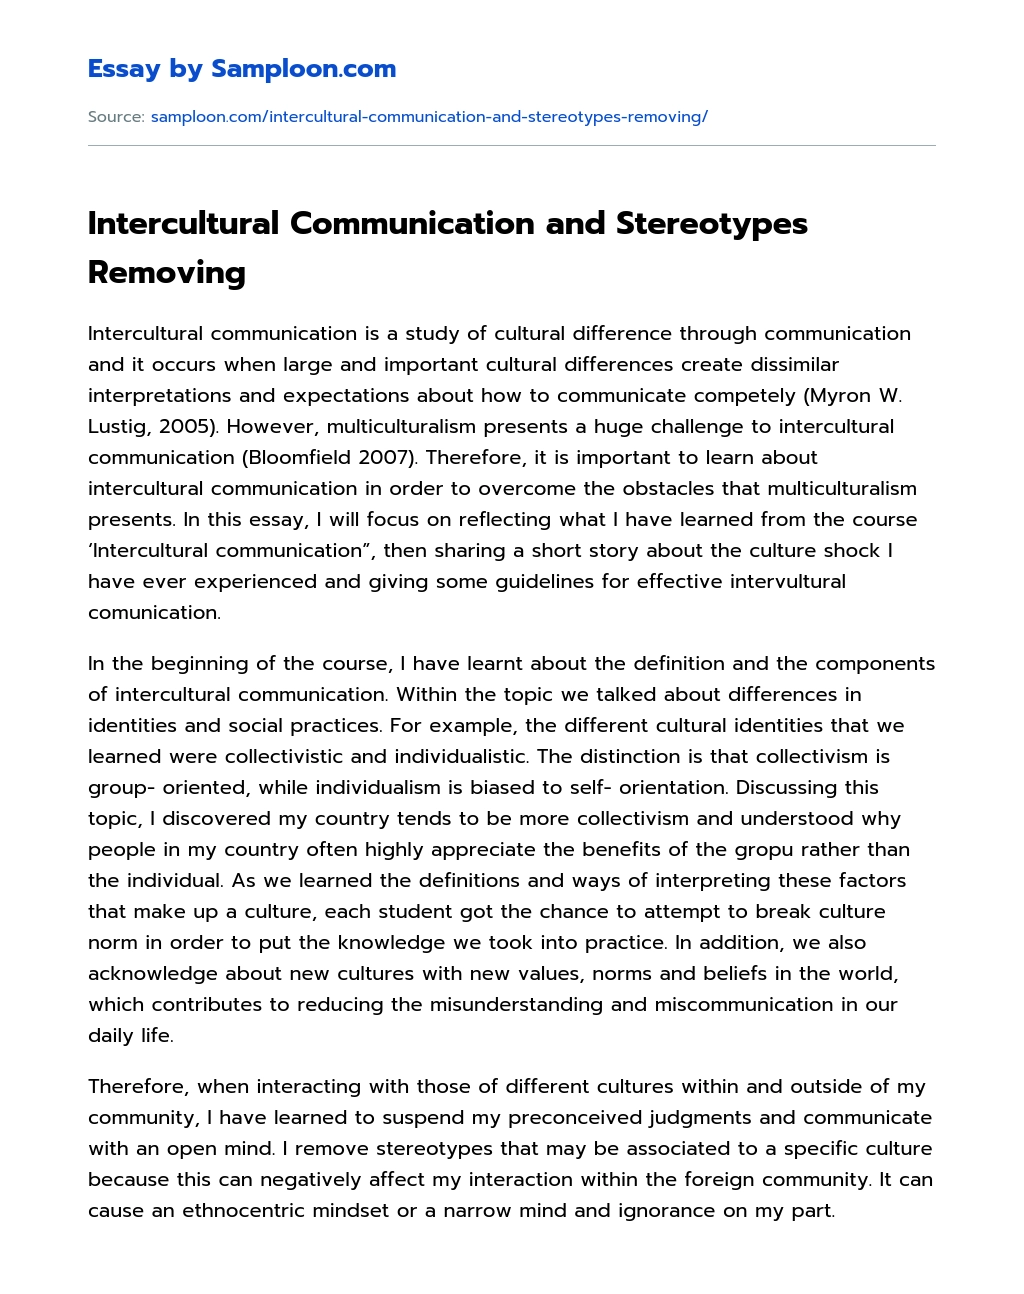 Intercultural Communication and Stereotypes Removing essay